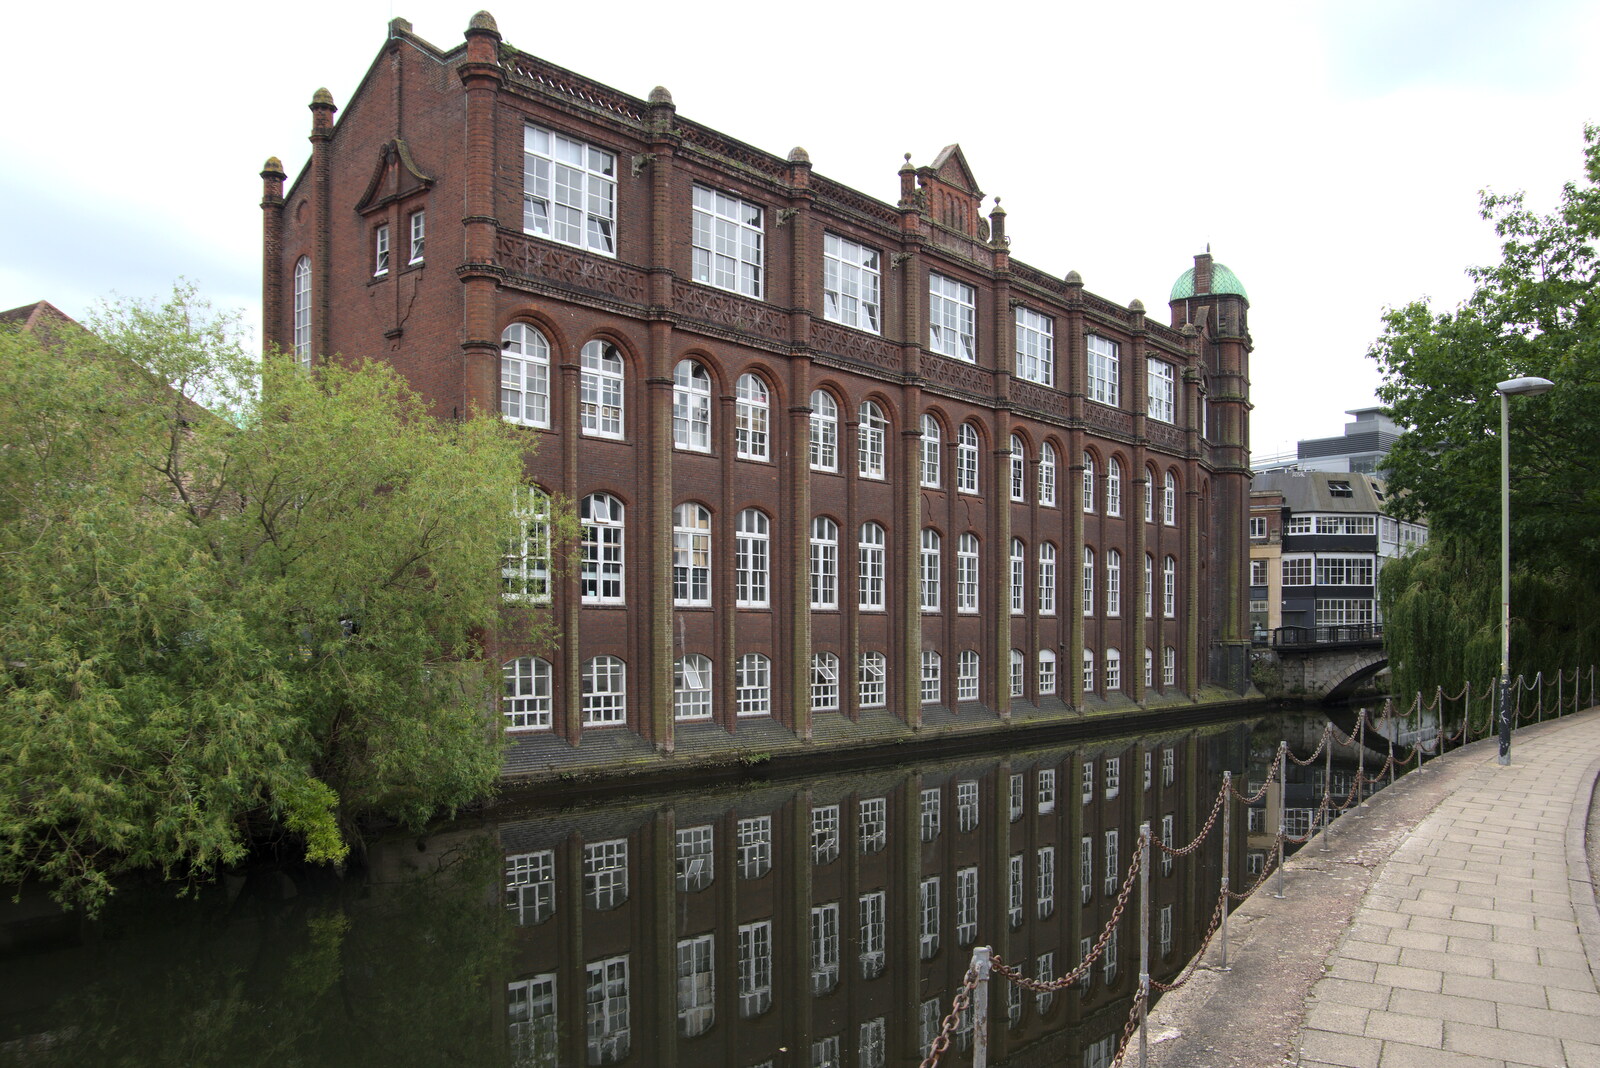 Another impressive old factory building from Discovering the Hidden City: Norwich, Norfolk - 23rd May 2022